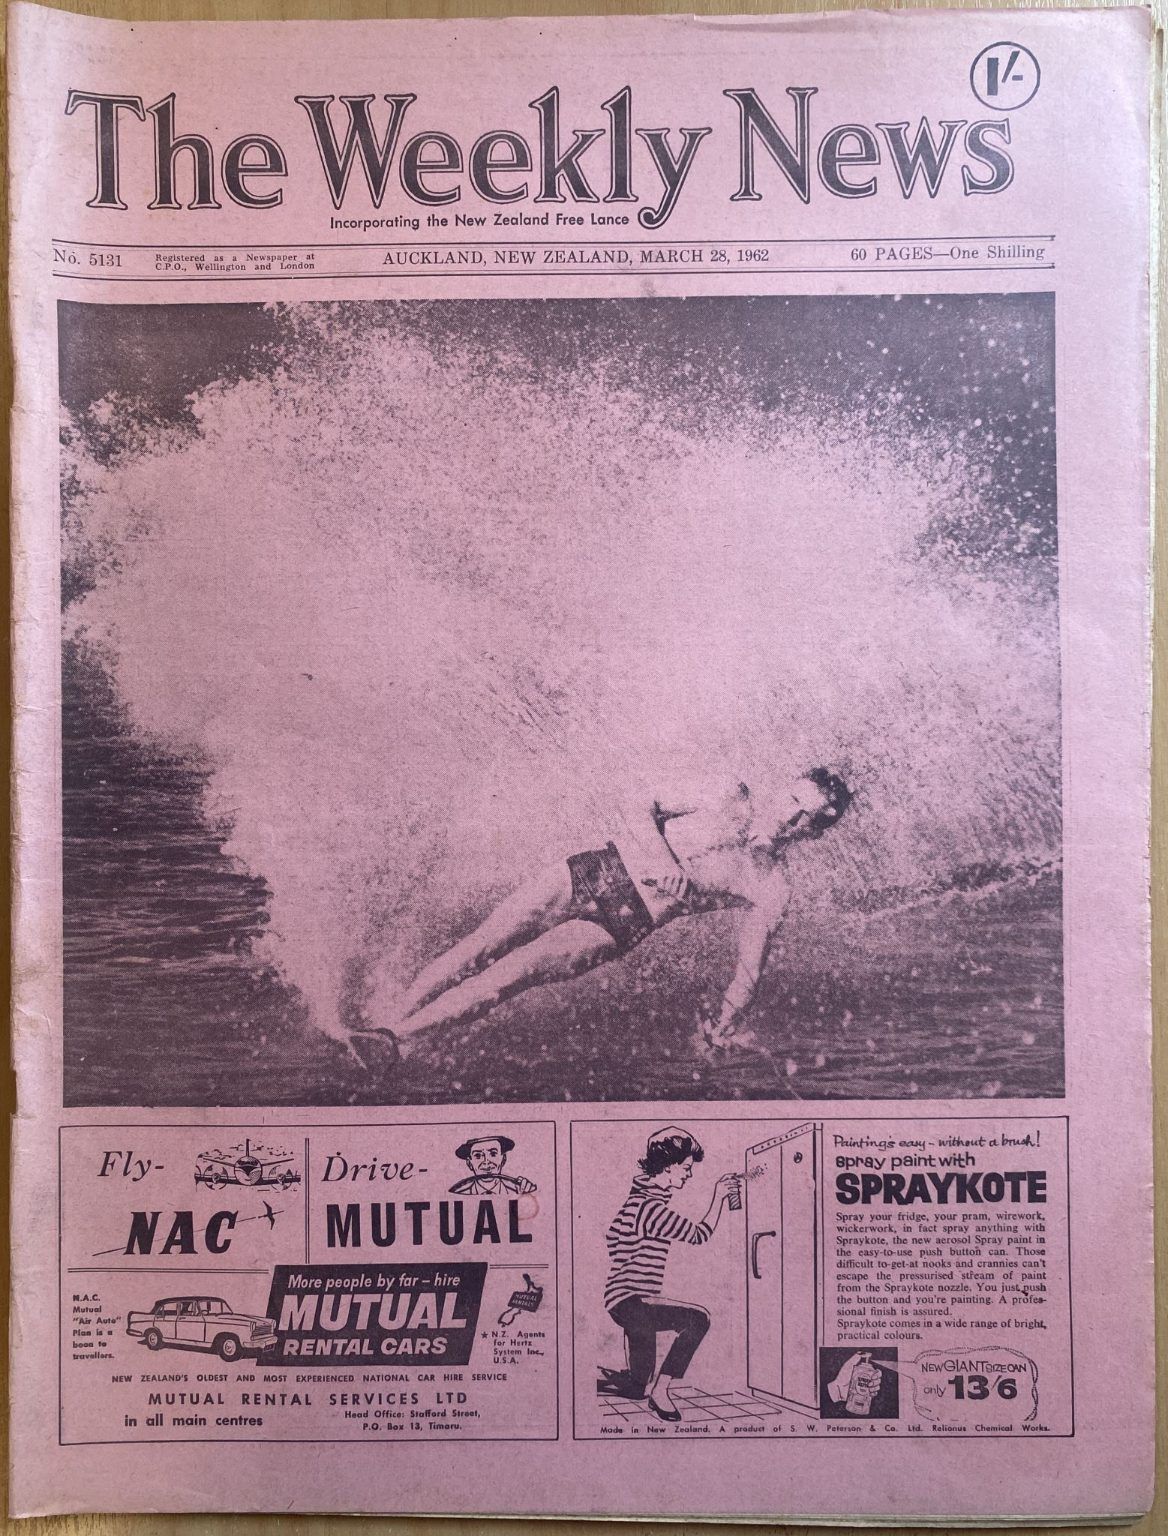 OLD NEWSPAPER: The Weekly News, No. 5131, 28 March 1962